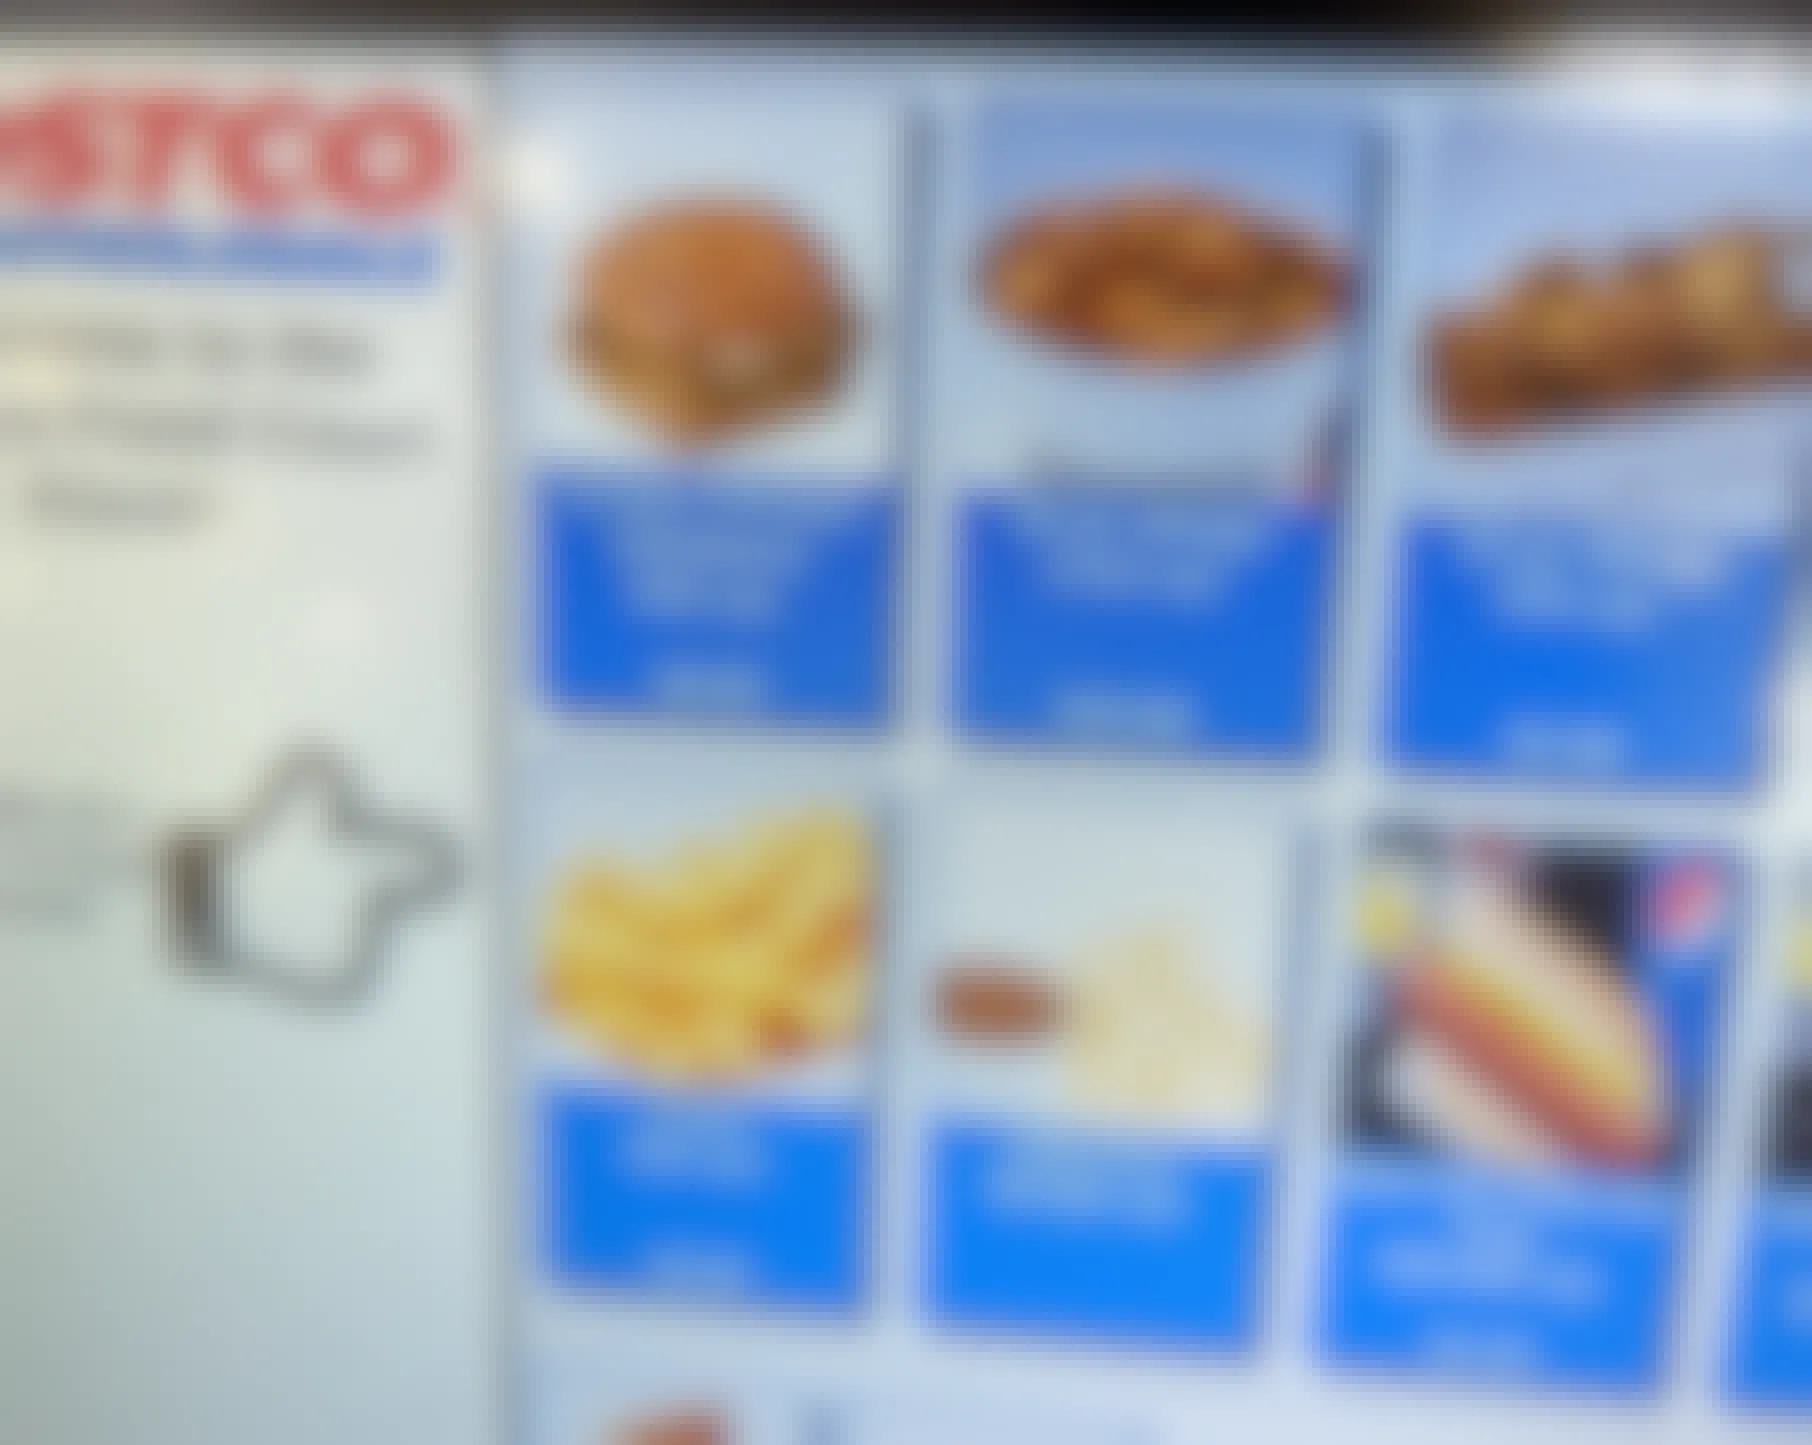 A close- up of the Costco food court kiosk screen showing uncommon regional food items